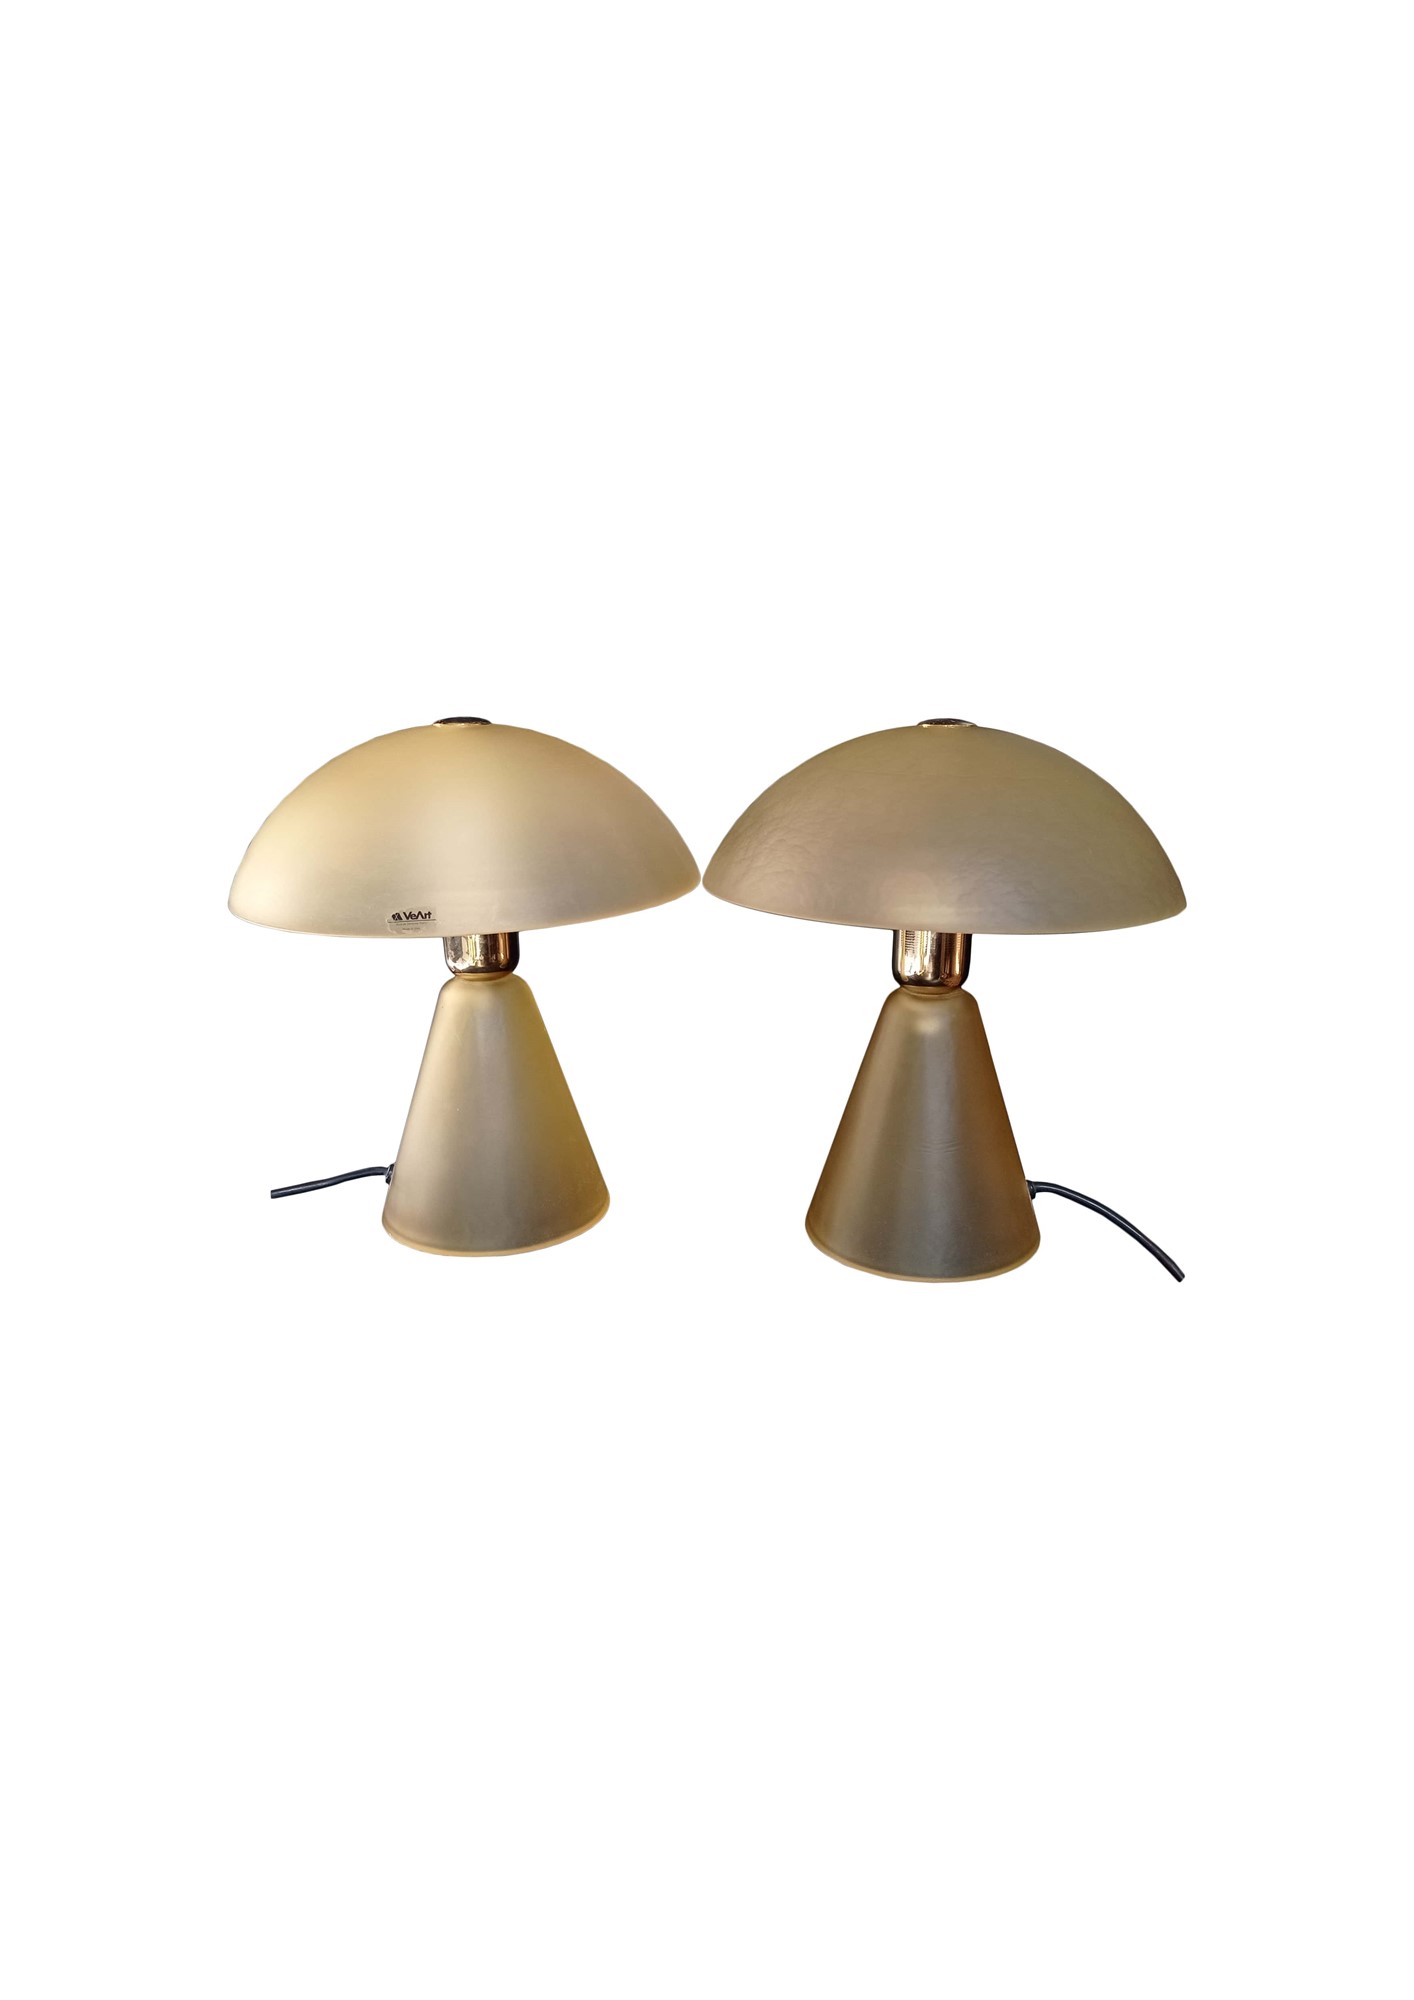 Set of two table lamps - Image 2 of 5